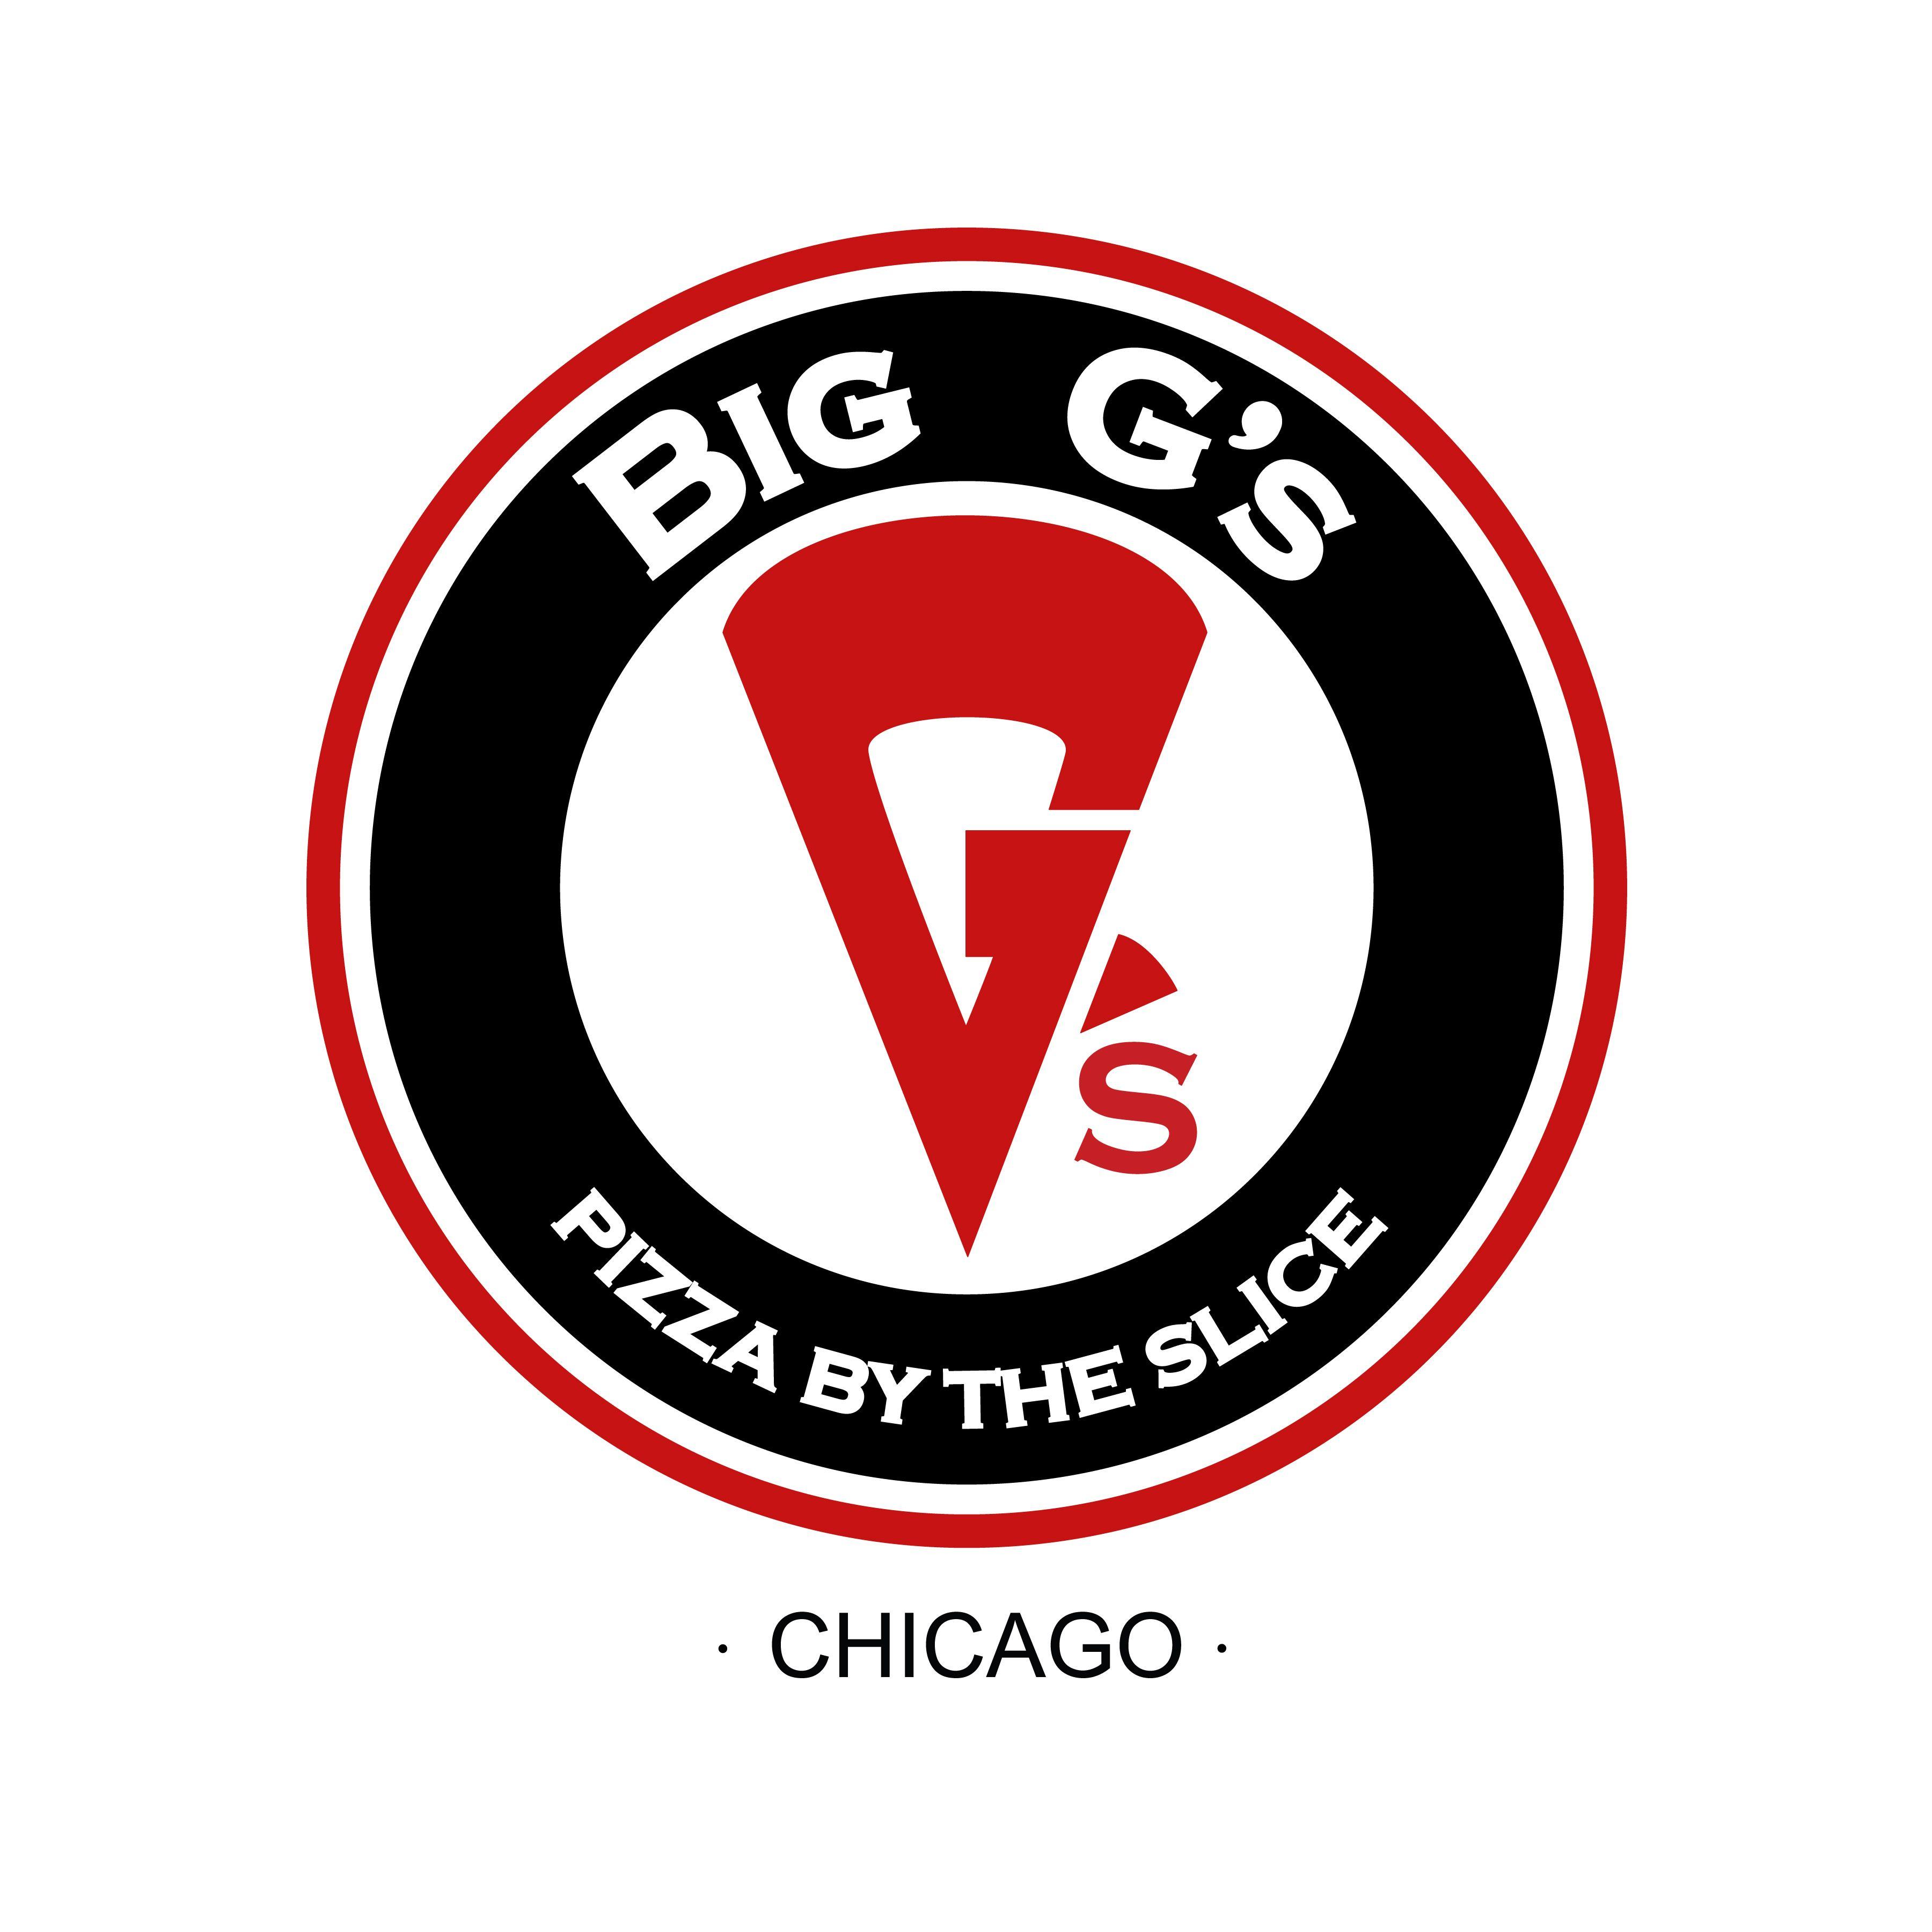 Chi-Town Logo - Big G's Pizza Logo Town West Designs. Pizza logo, Moving